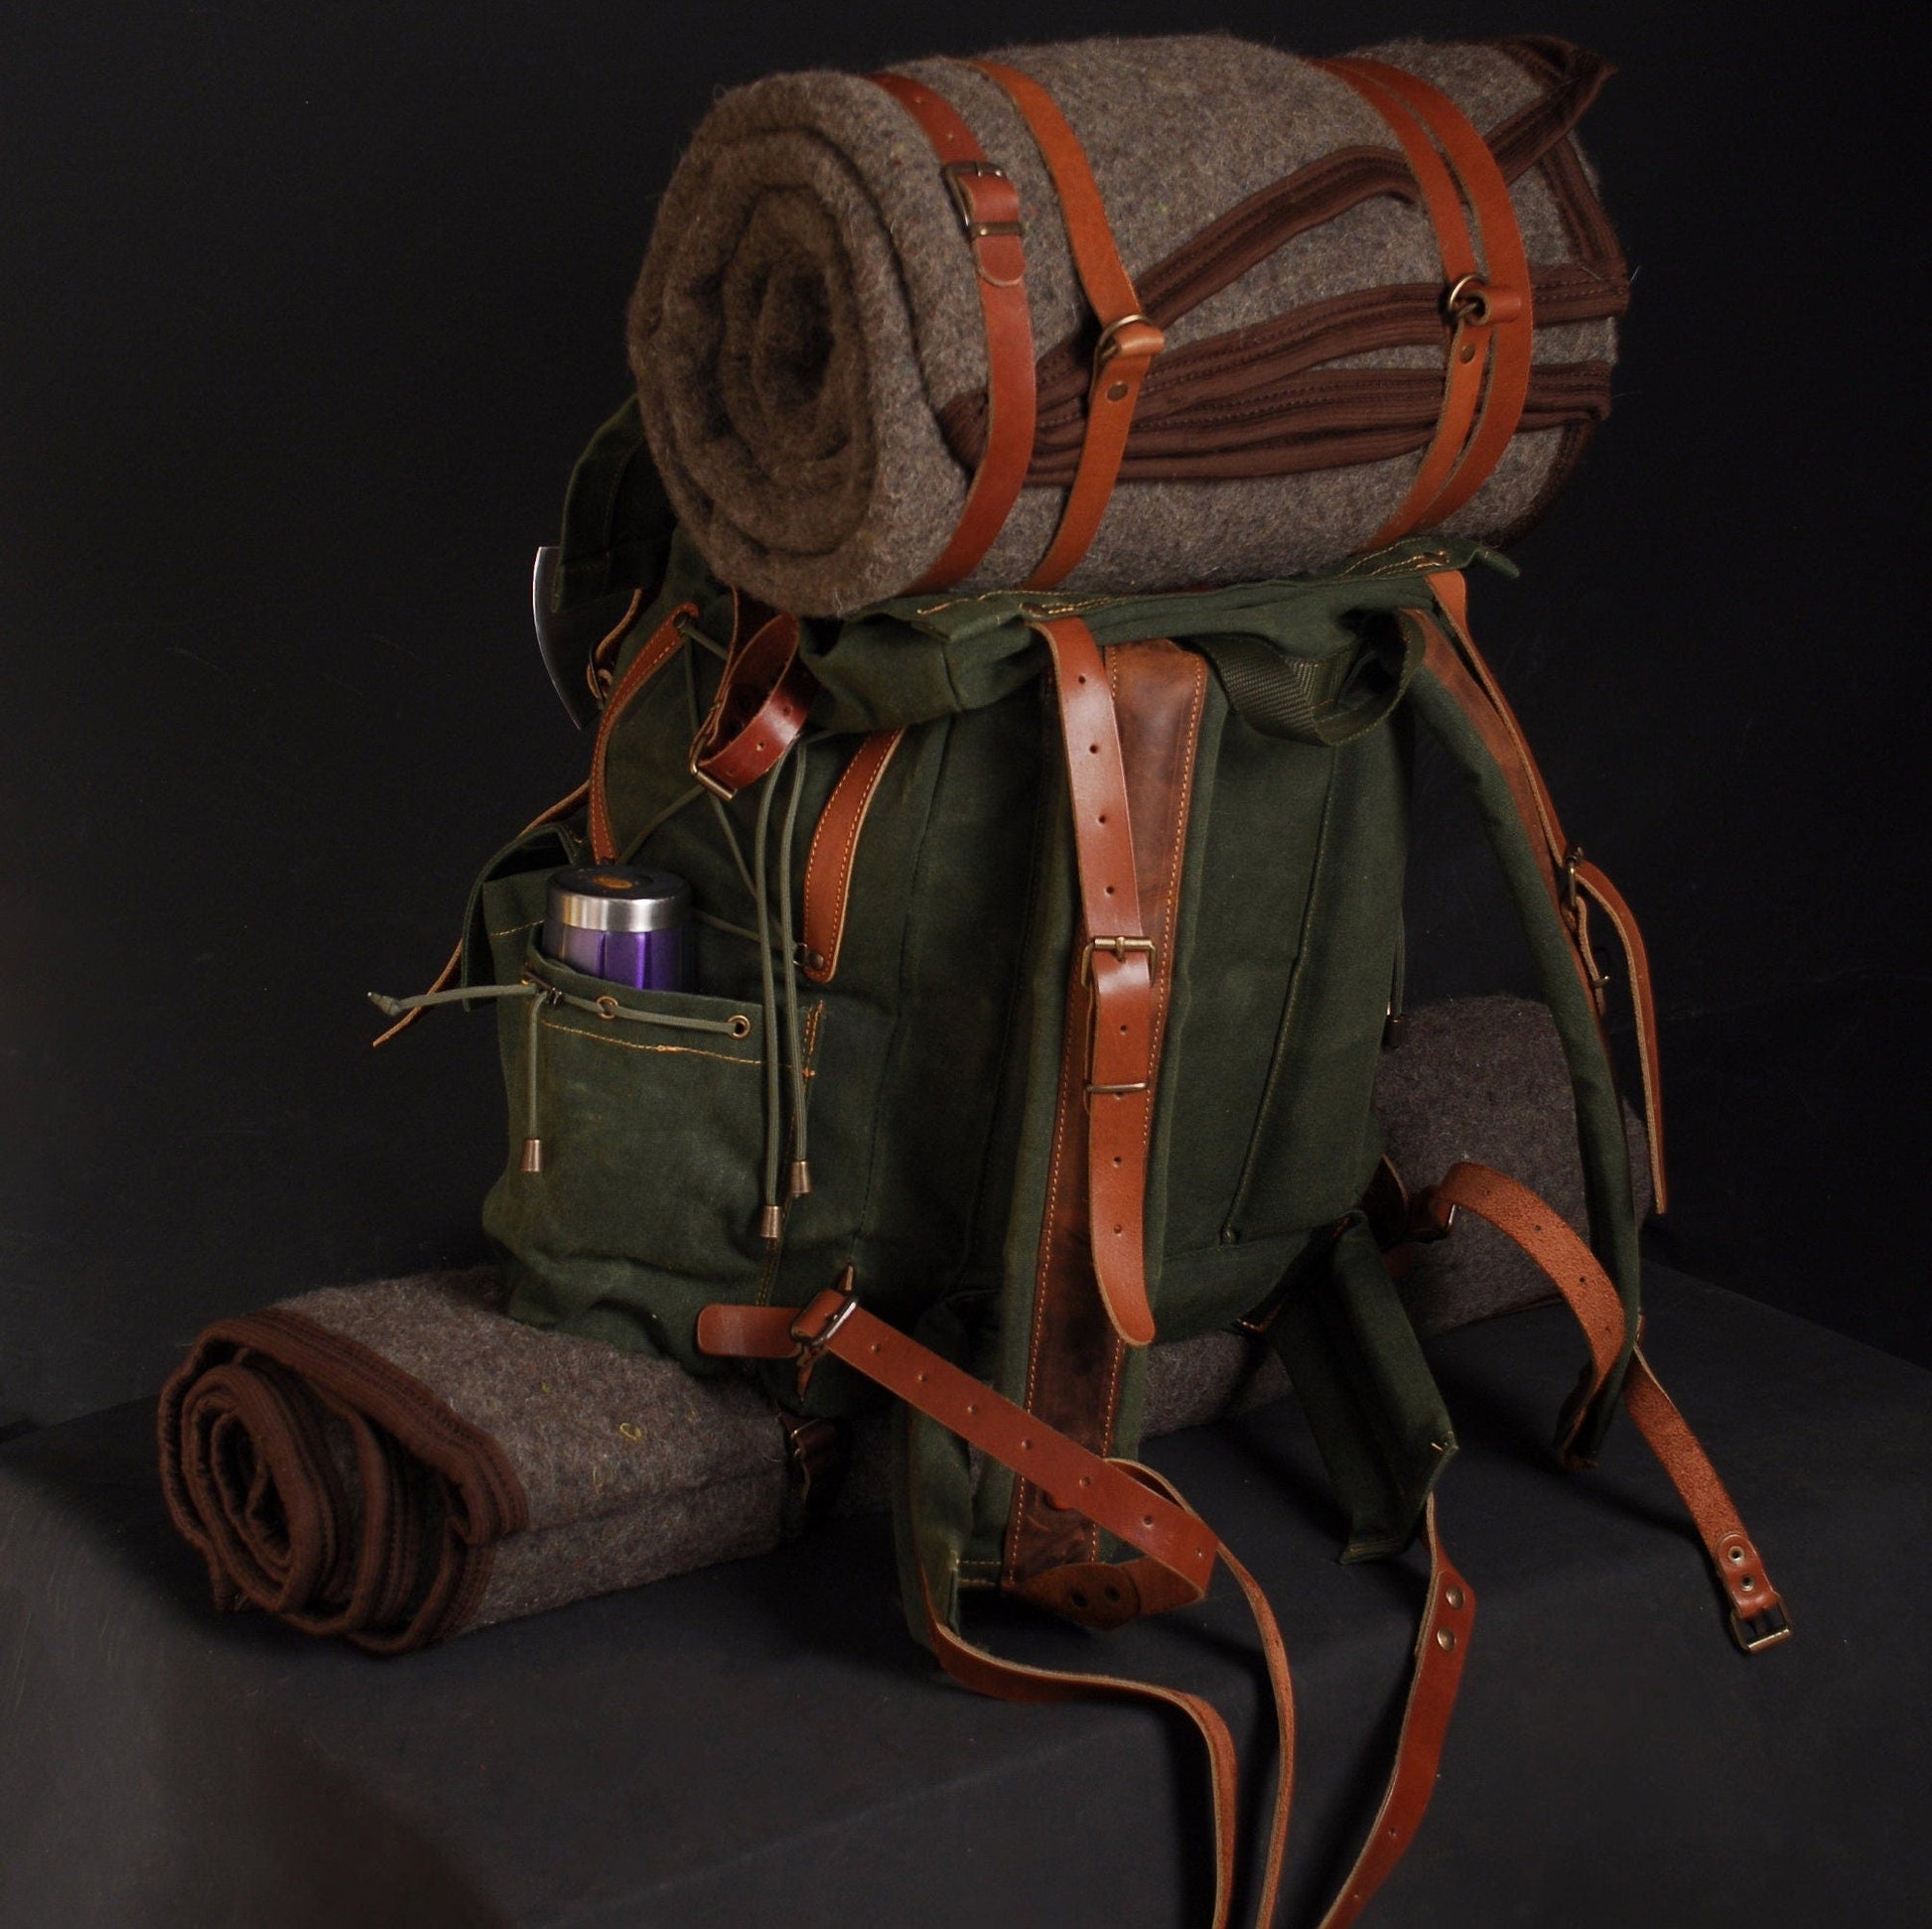 50L | Camping Backpack | Bushcraft Backpack | Brown - Green | Handmade  Leather-Canvas | Rucksack | Camping, Bushcraft | Personalization